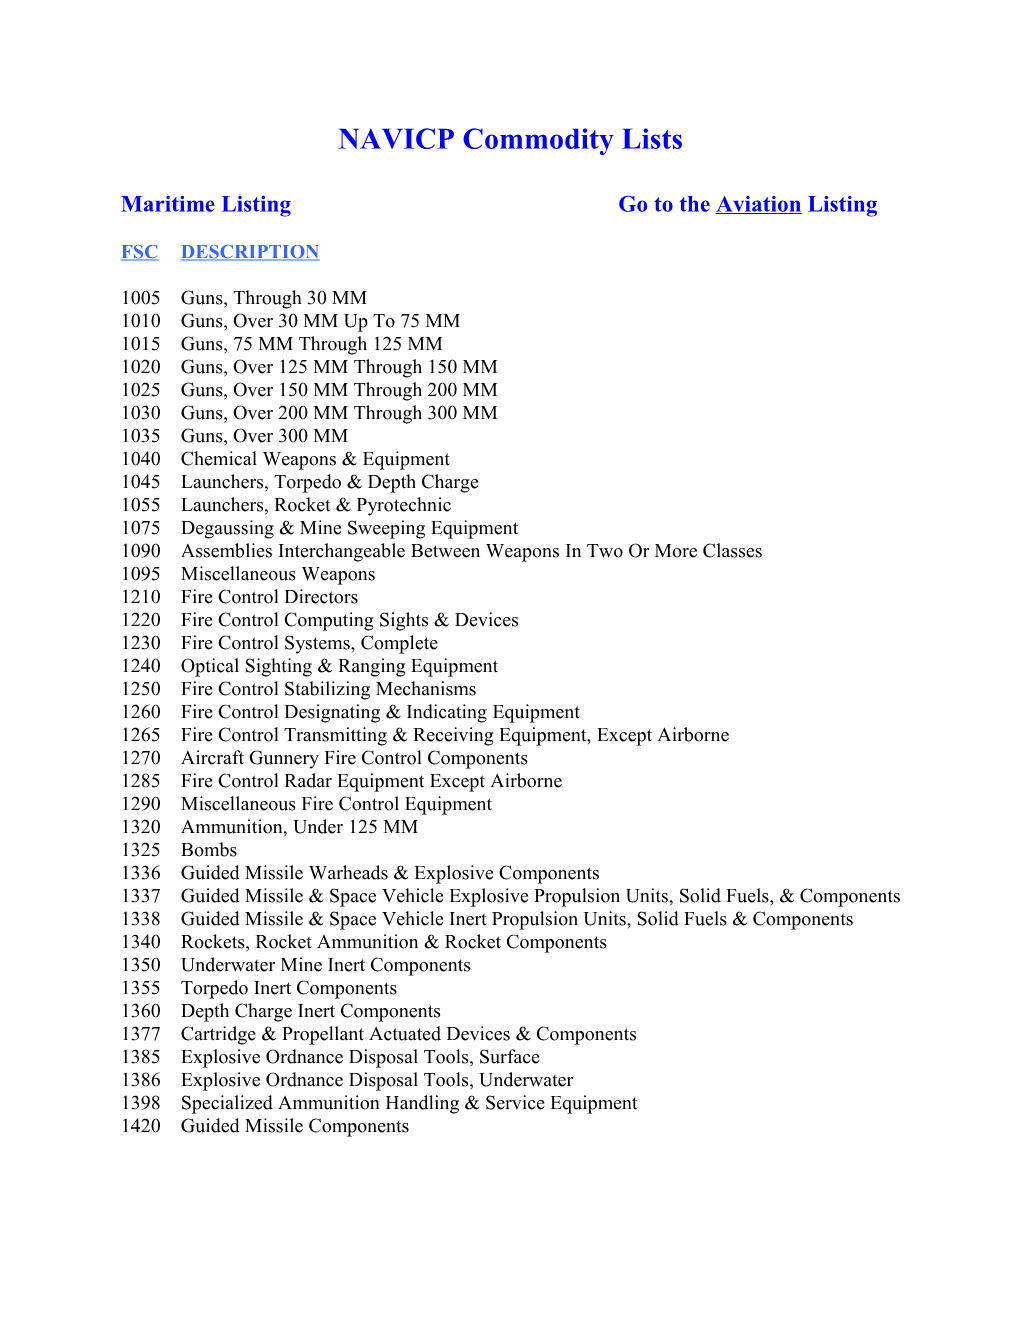 Maritime Commodity Listing